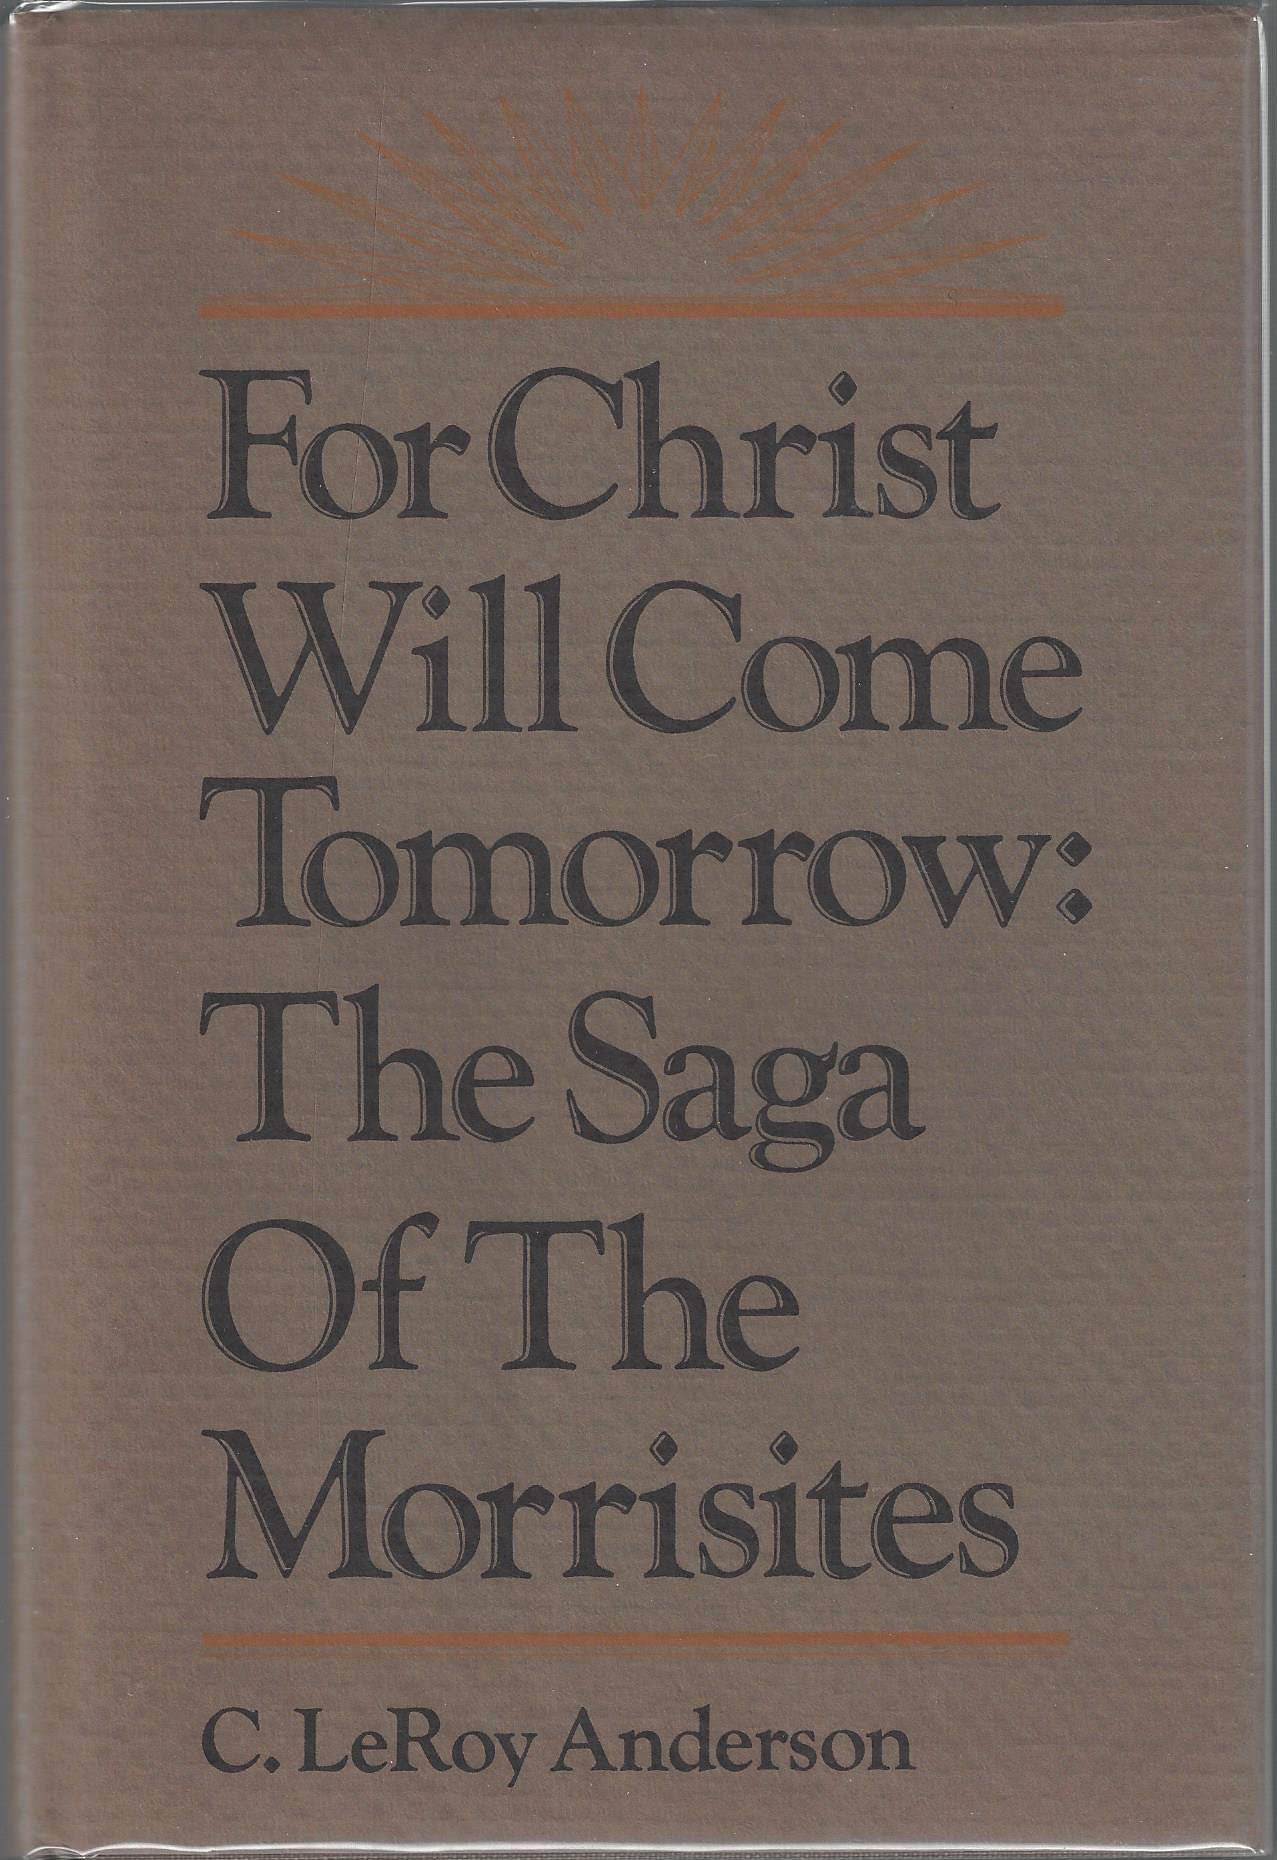 For Christ will come tomorrow: The saga of the Morrisites (book cover)